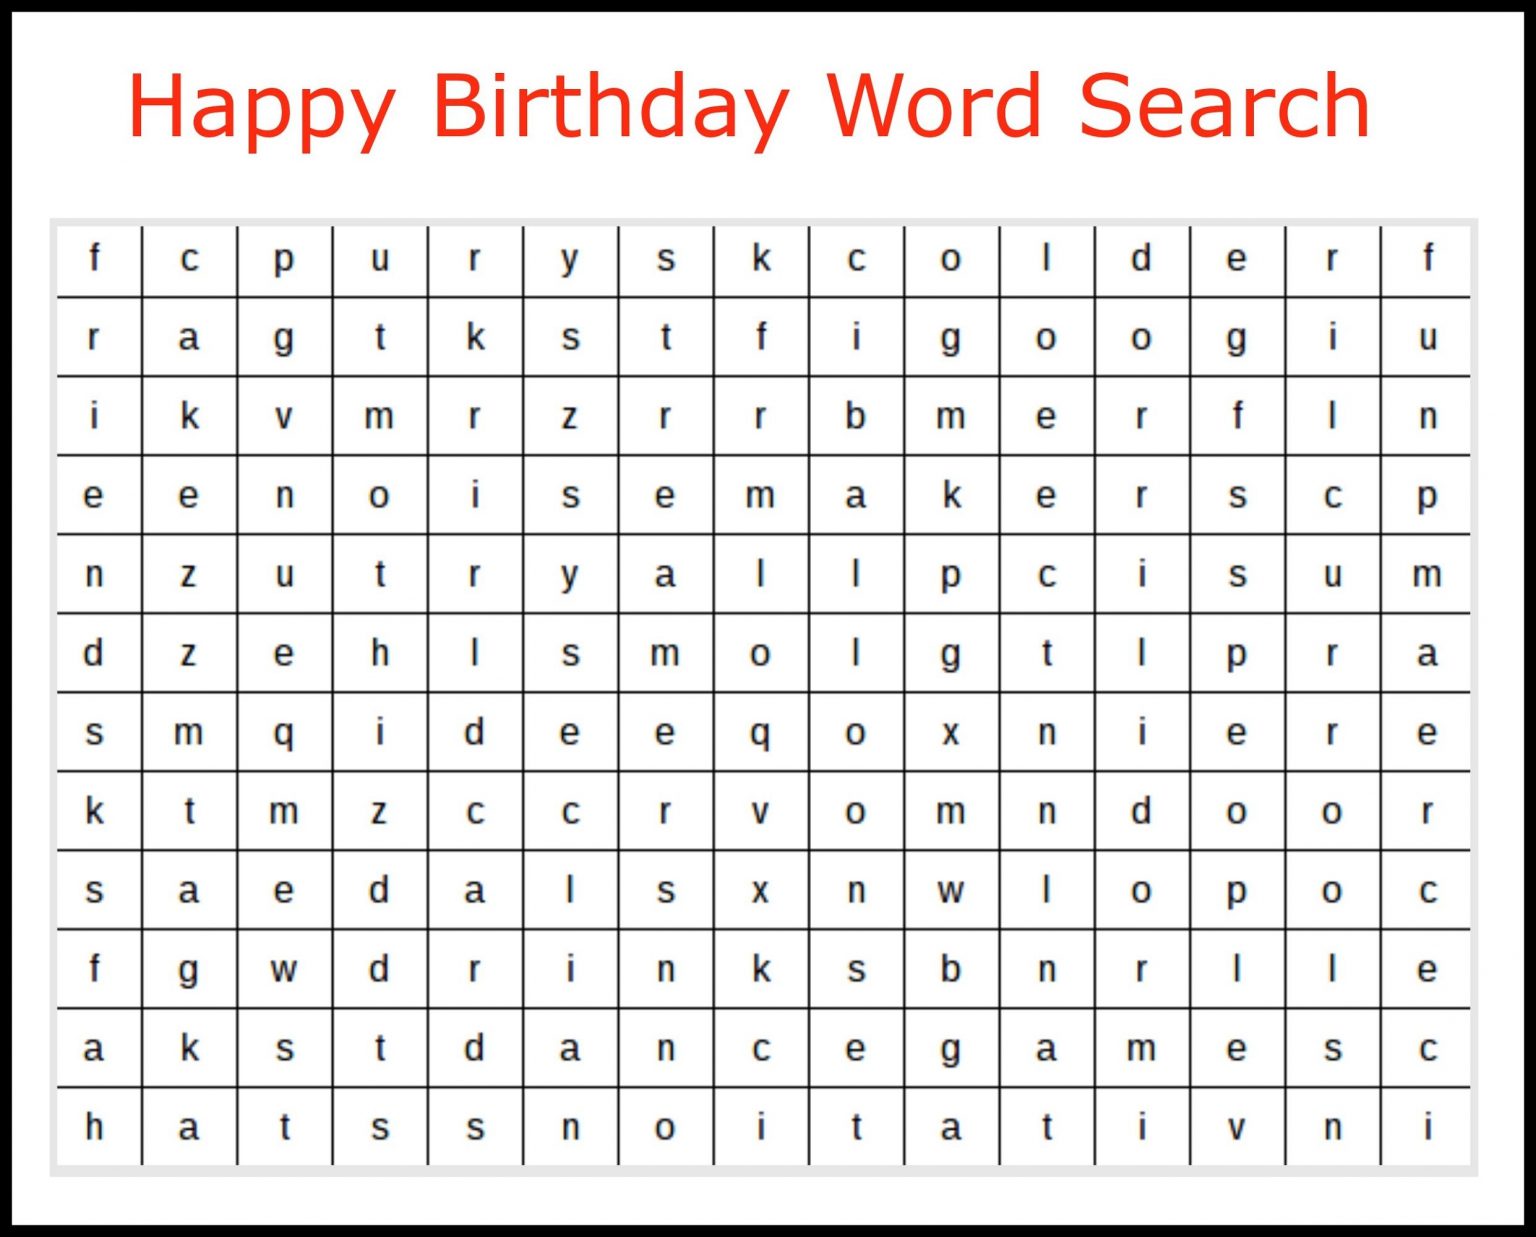 When Playing Happy Birthday Word Search, The Kid's Basic Word Search